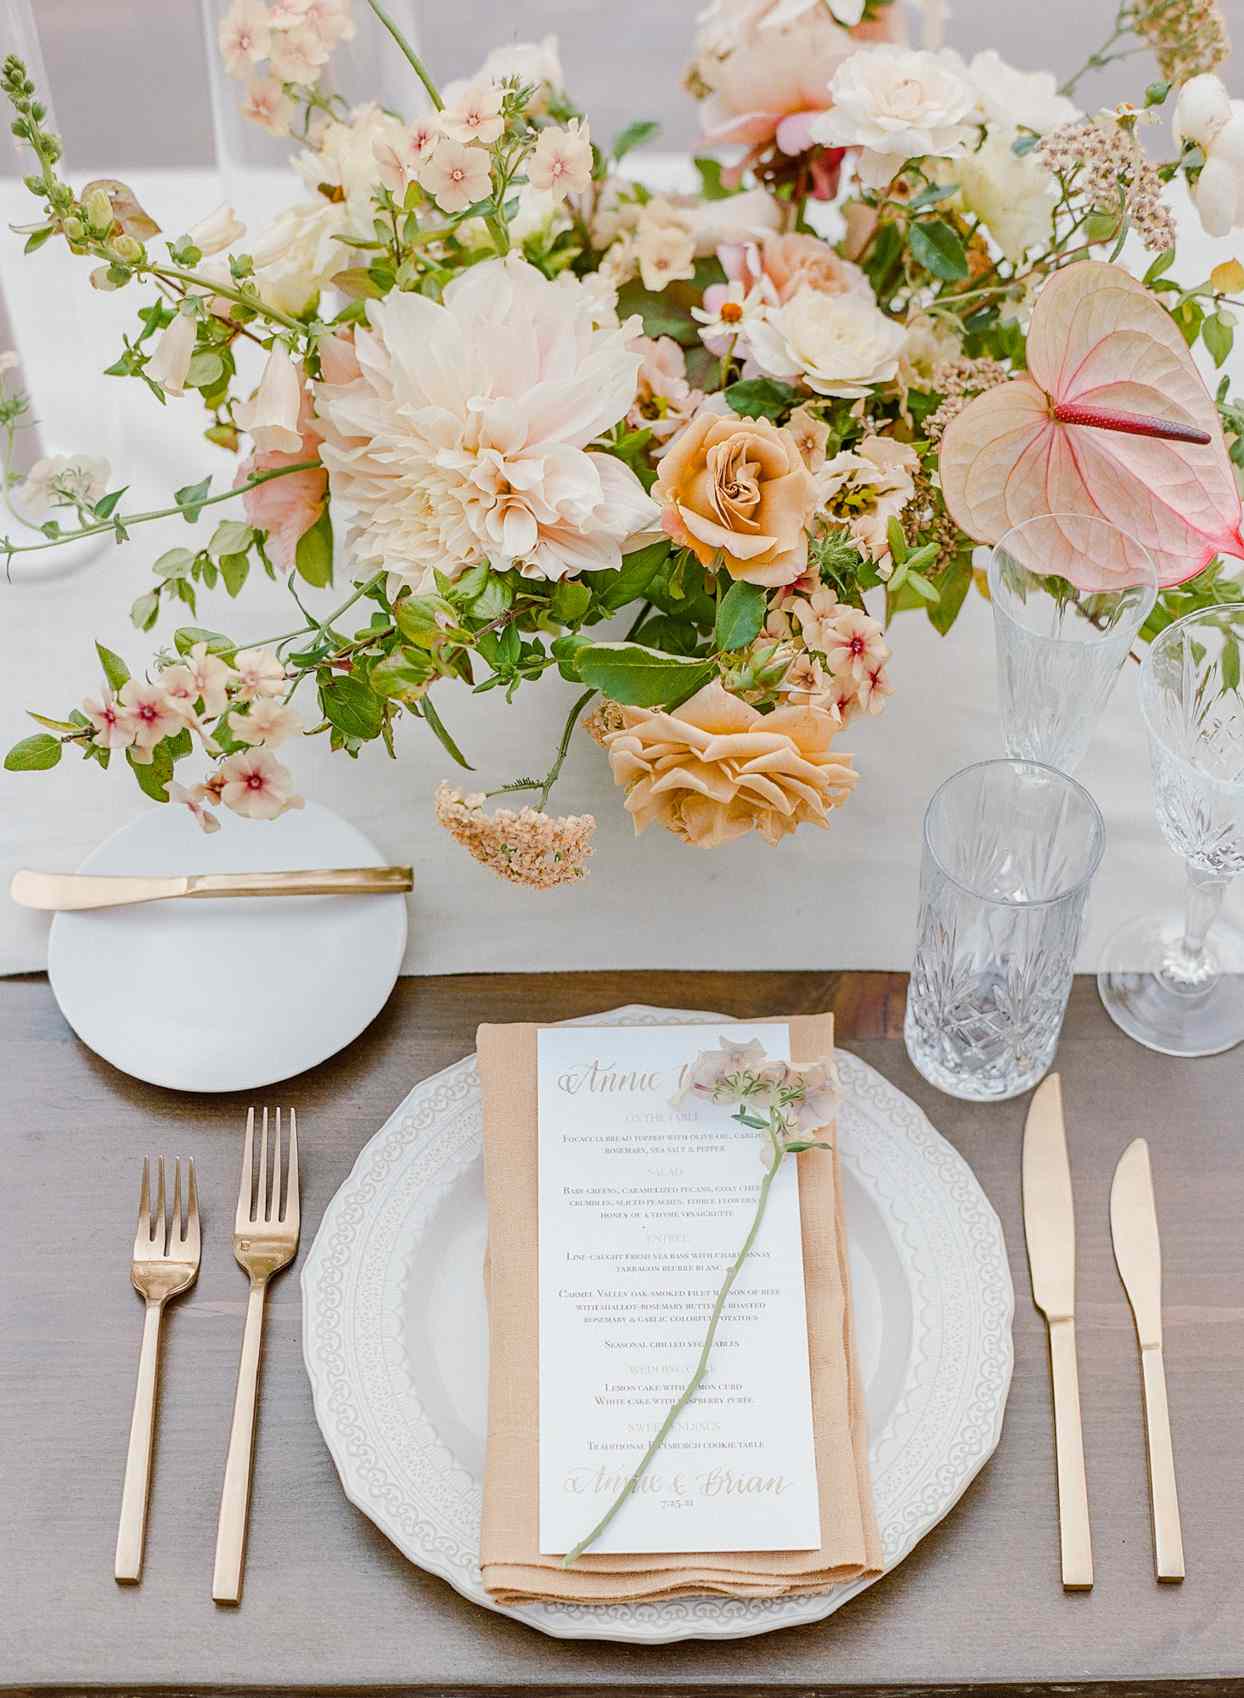 dinner table setting with floral centerpiece